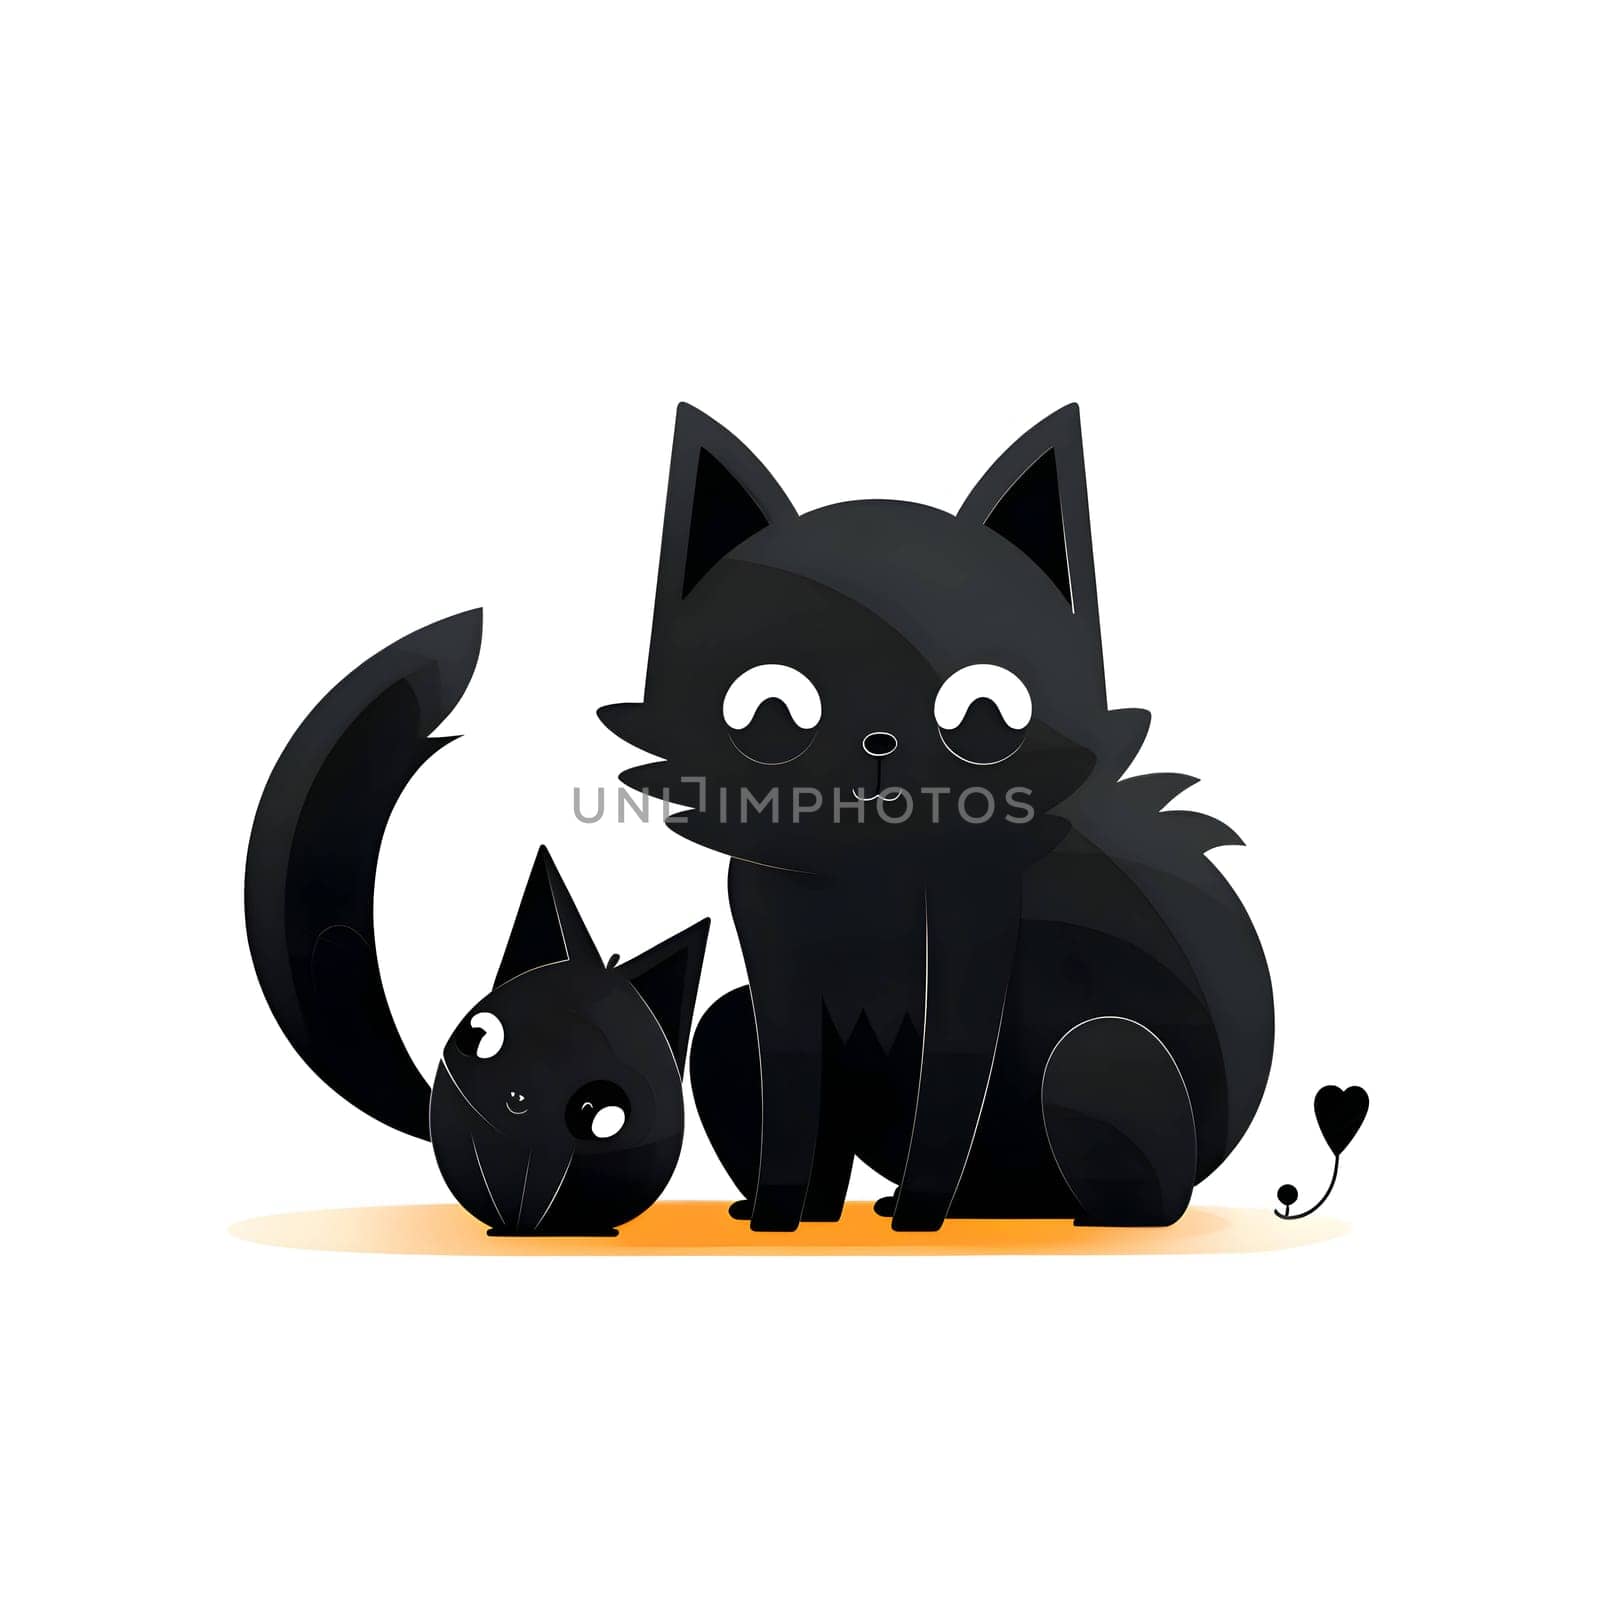 Vector illustration of two cats in black silhouette against a clean white background, capturing graceful forms.